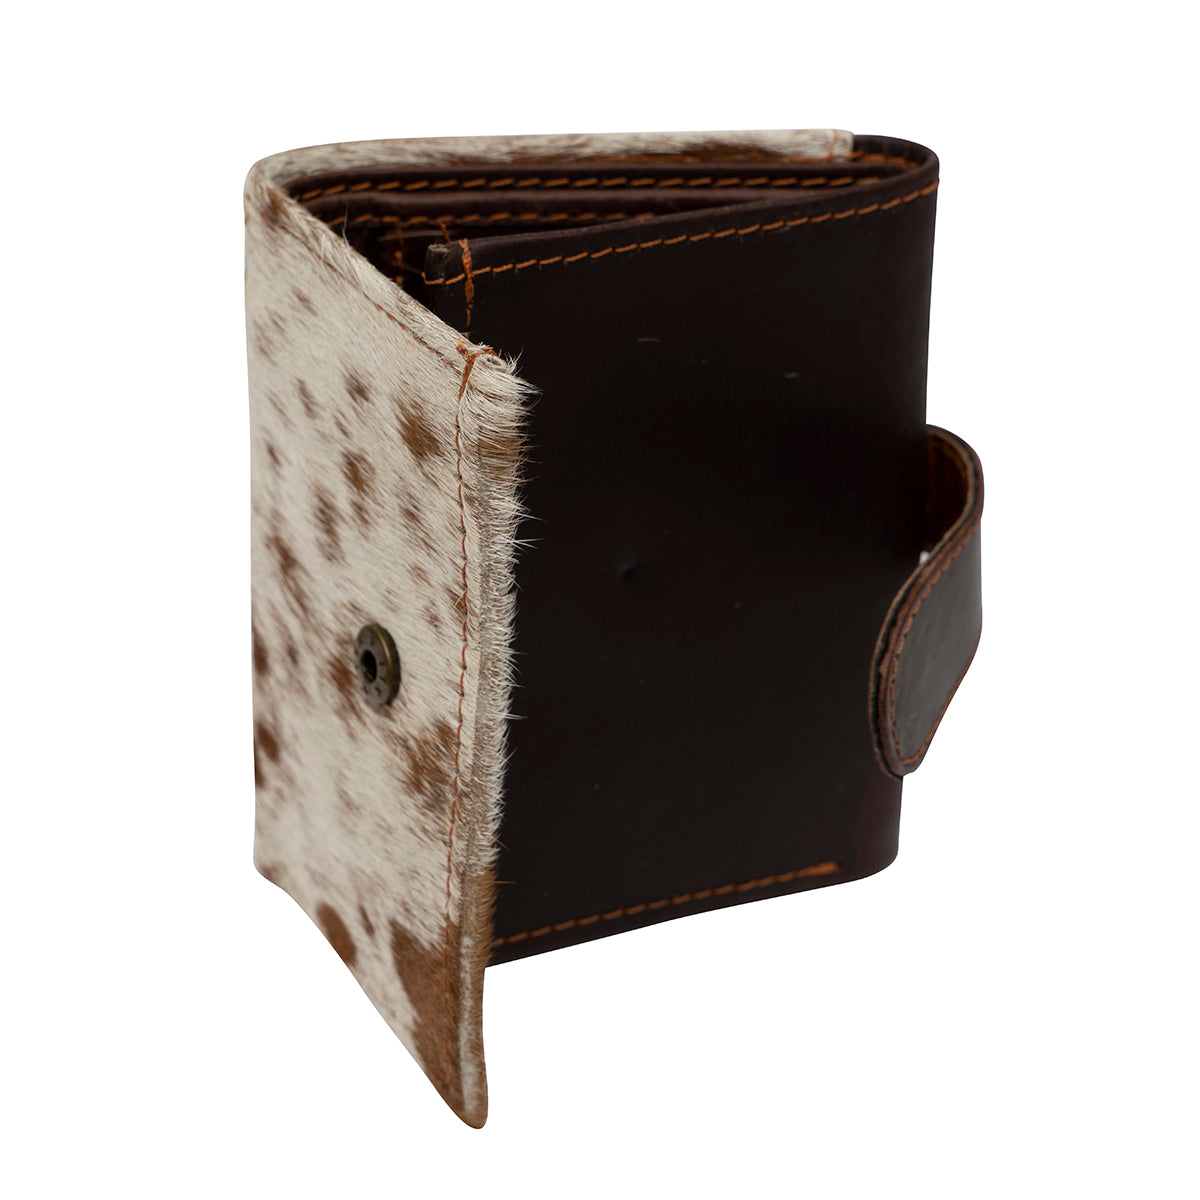 Cowhide Trifold Wallet